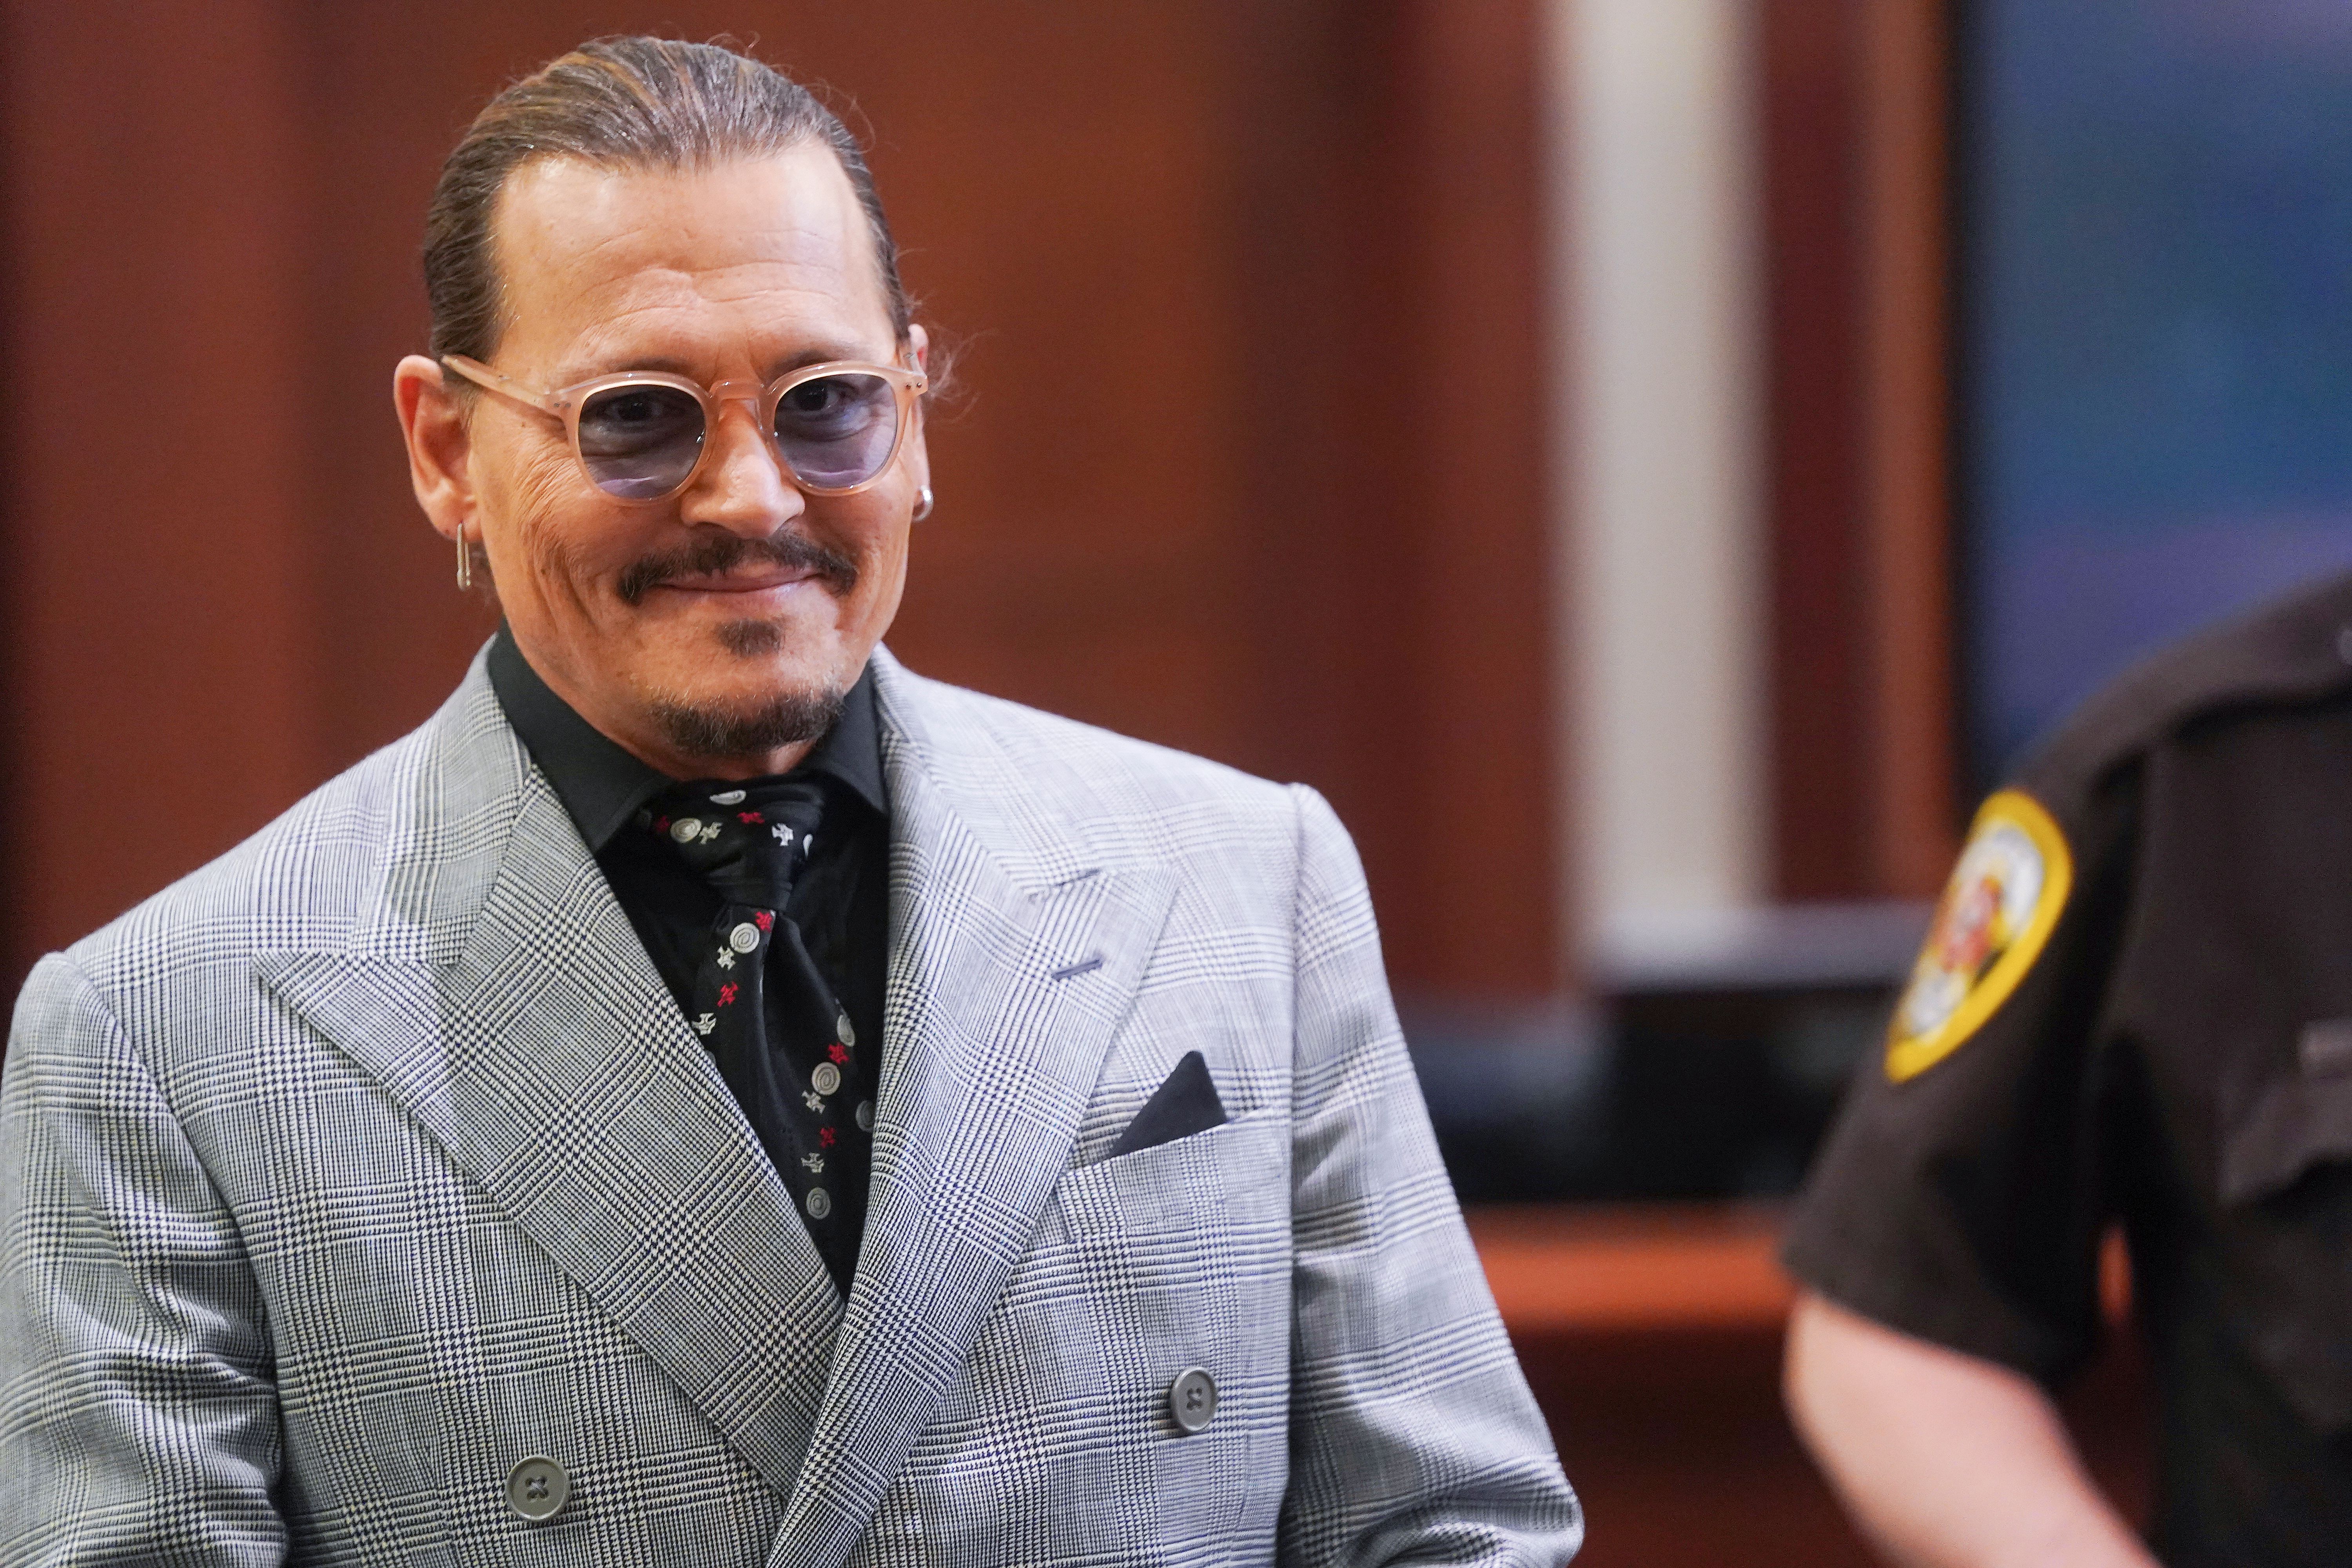 Johnny Depp was a controlling lover, ex-girlfriend testifies The Seattle Times